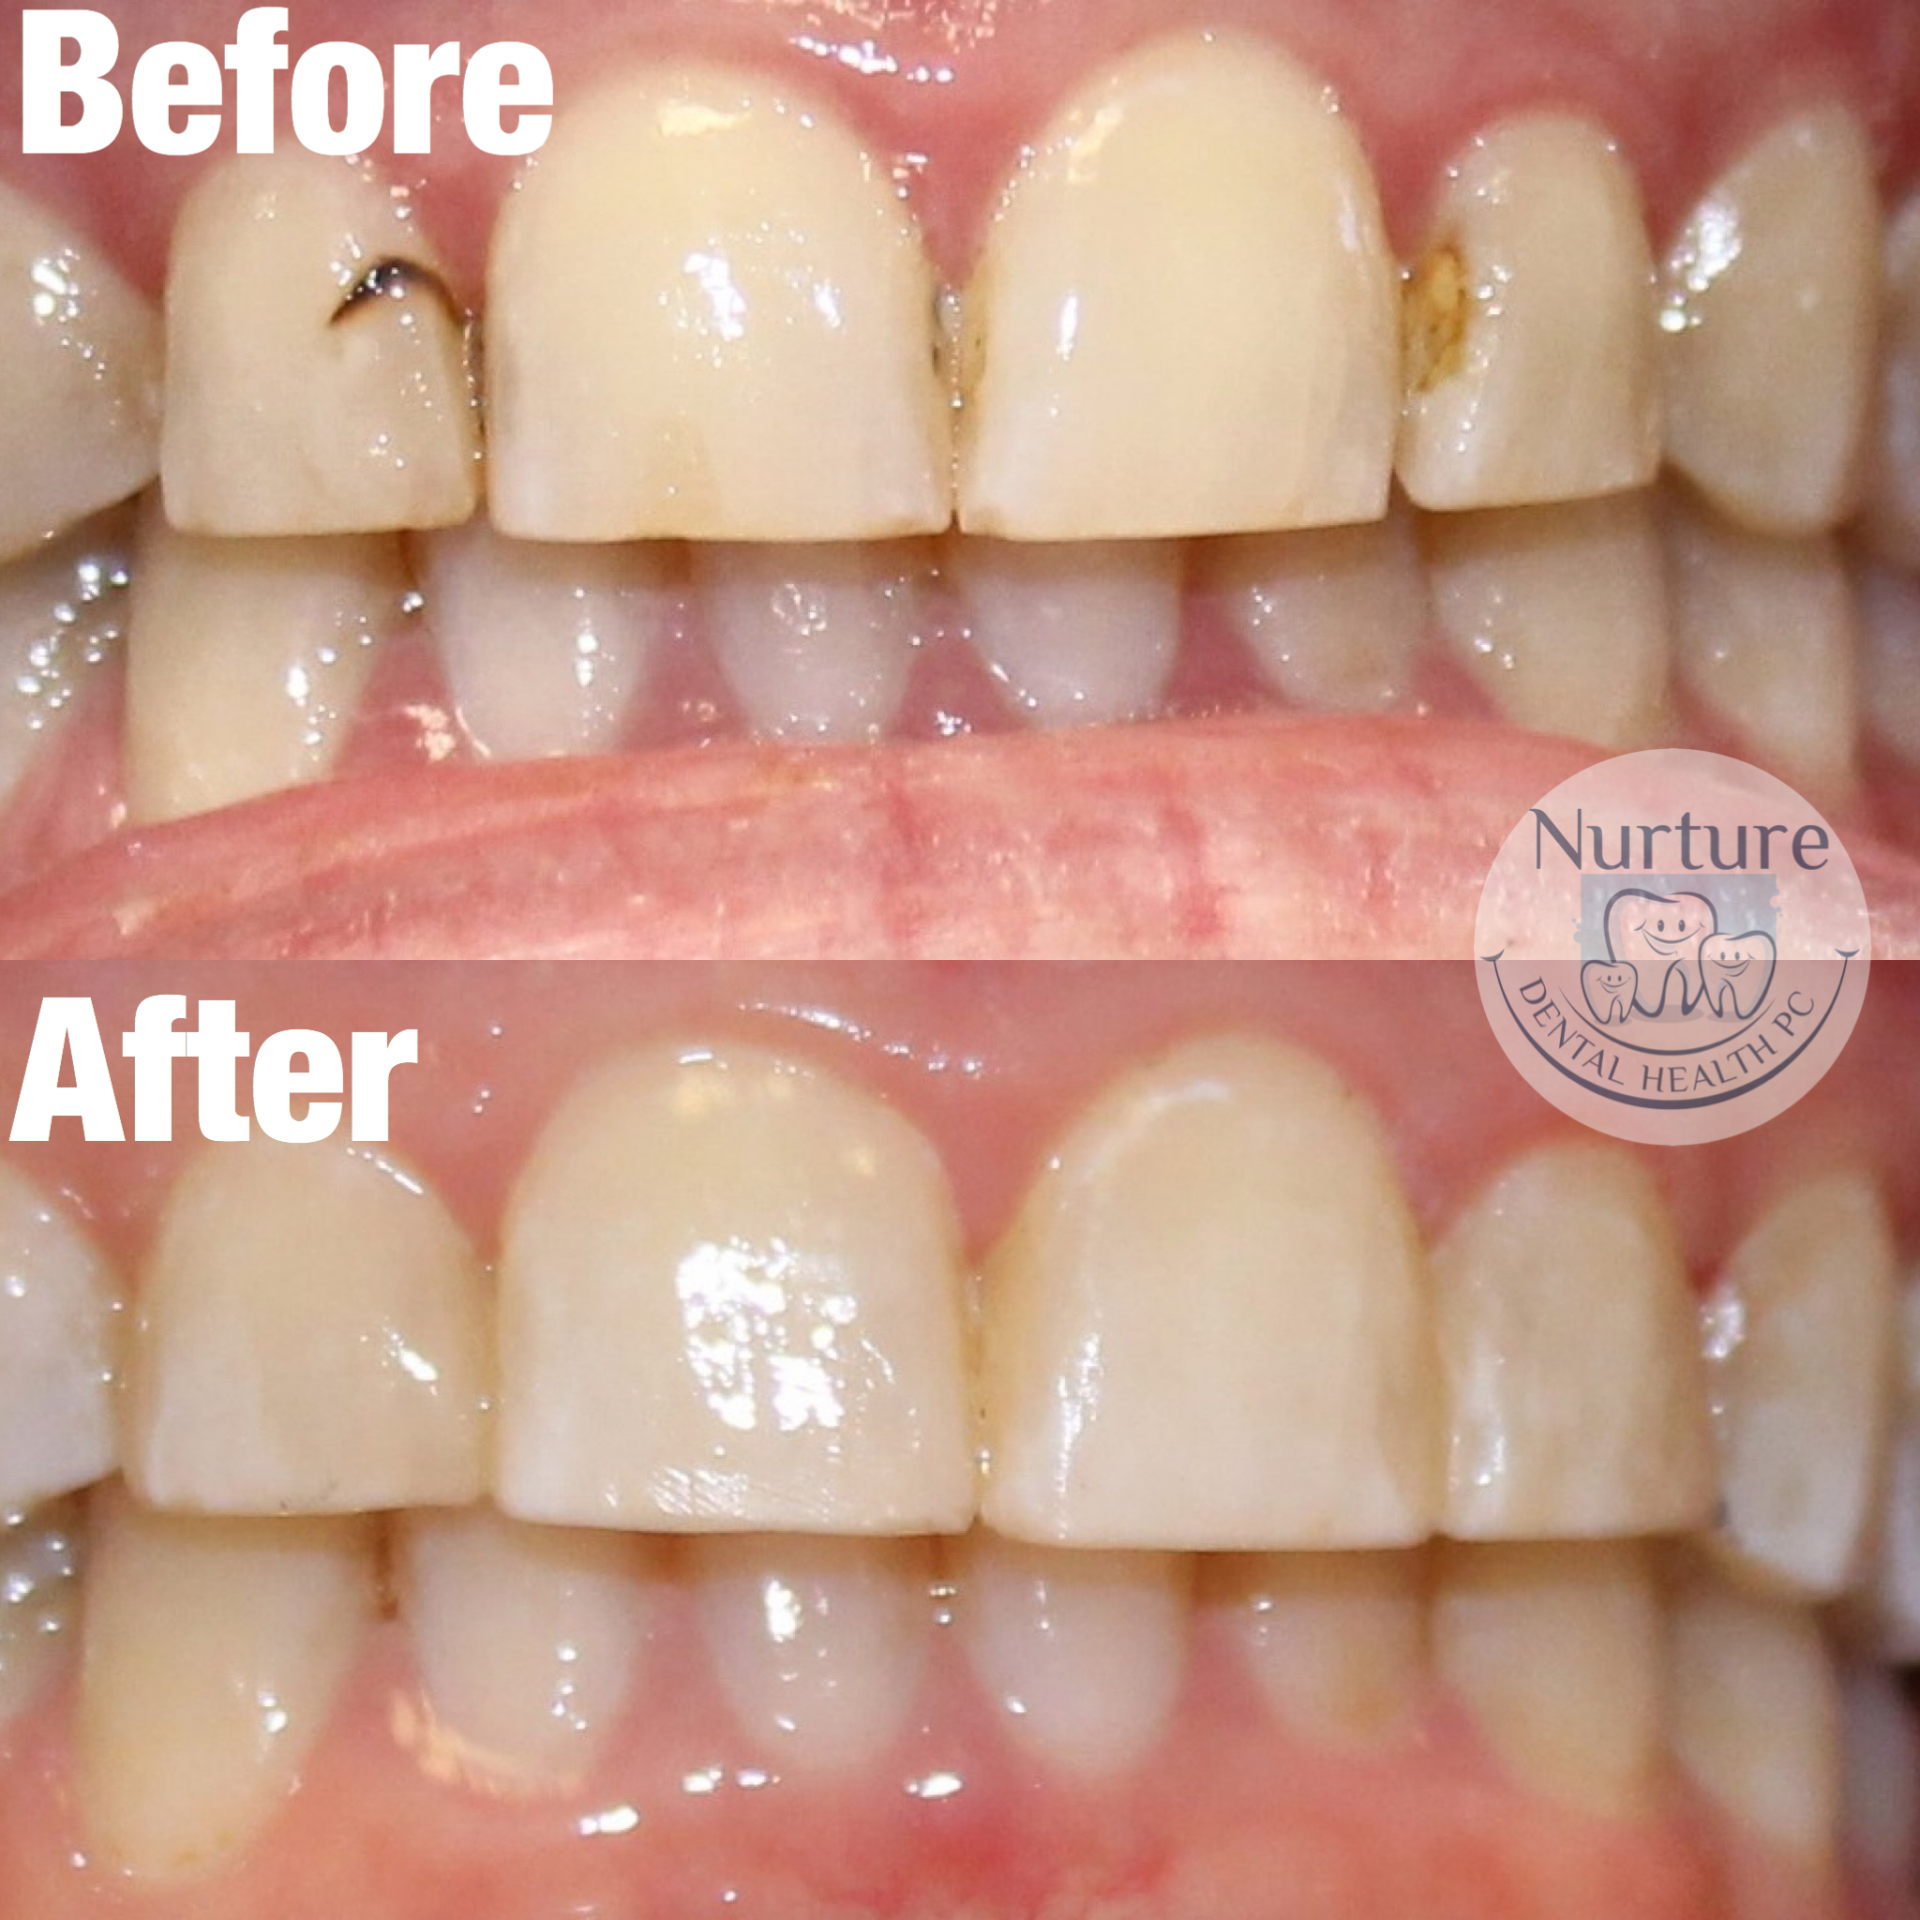 Resin Bonding in replacement of existing failing composite restorations.